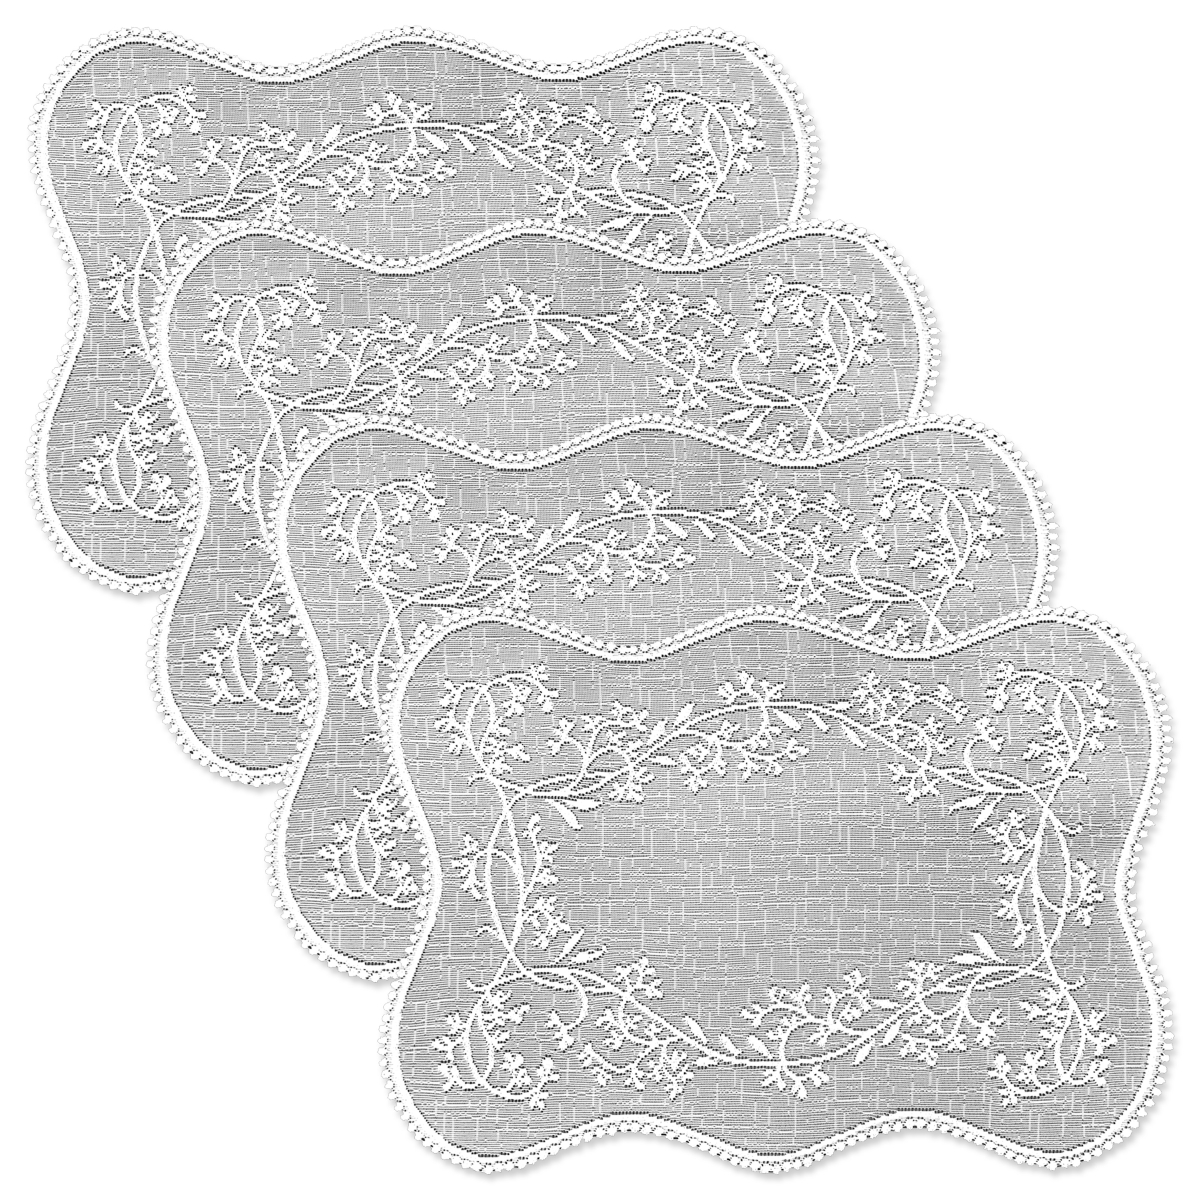 Heritage Lace SD-1420W-S 14 x 20 in. Sheer Divine Placemat - White - Set of 4